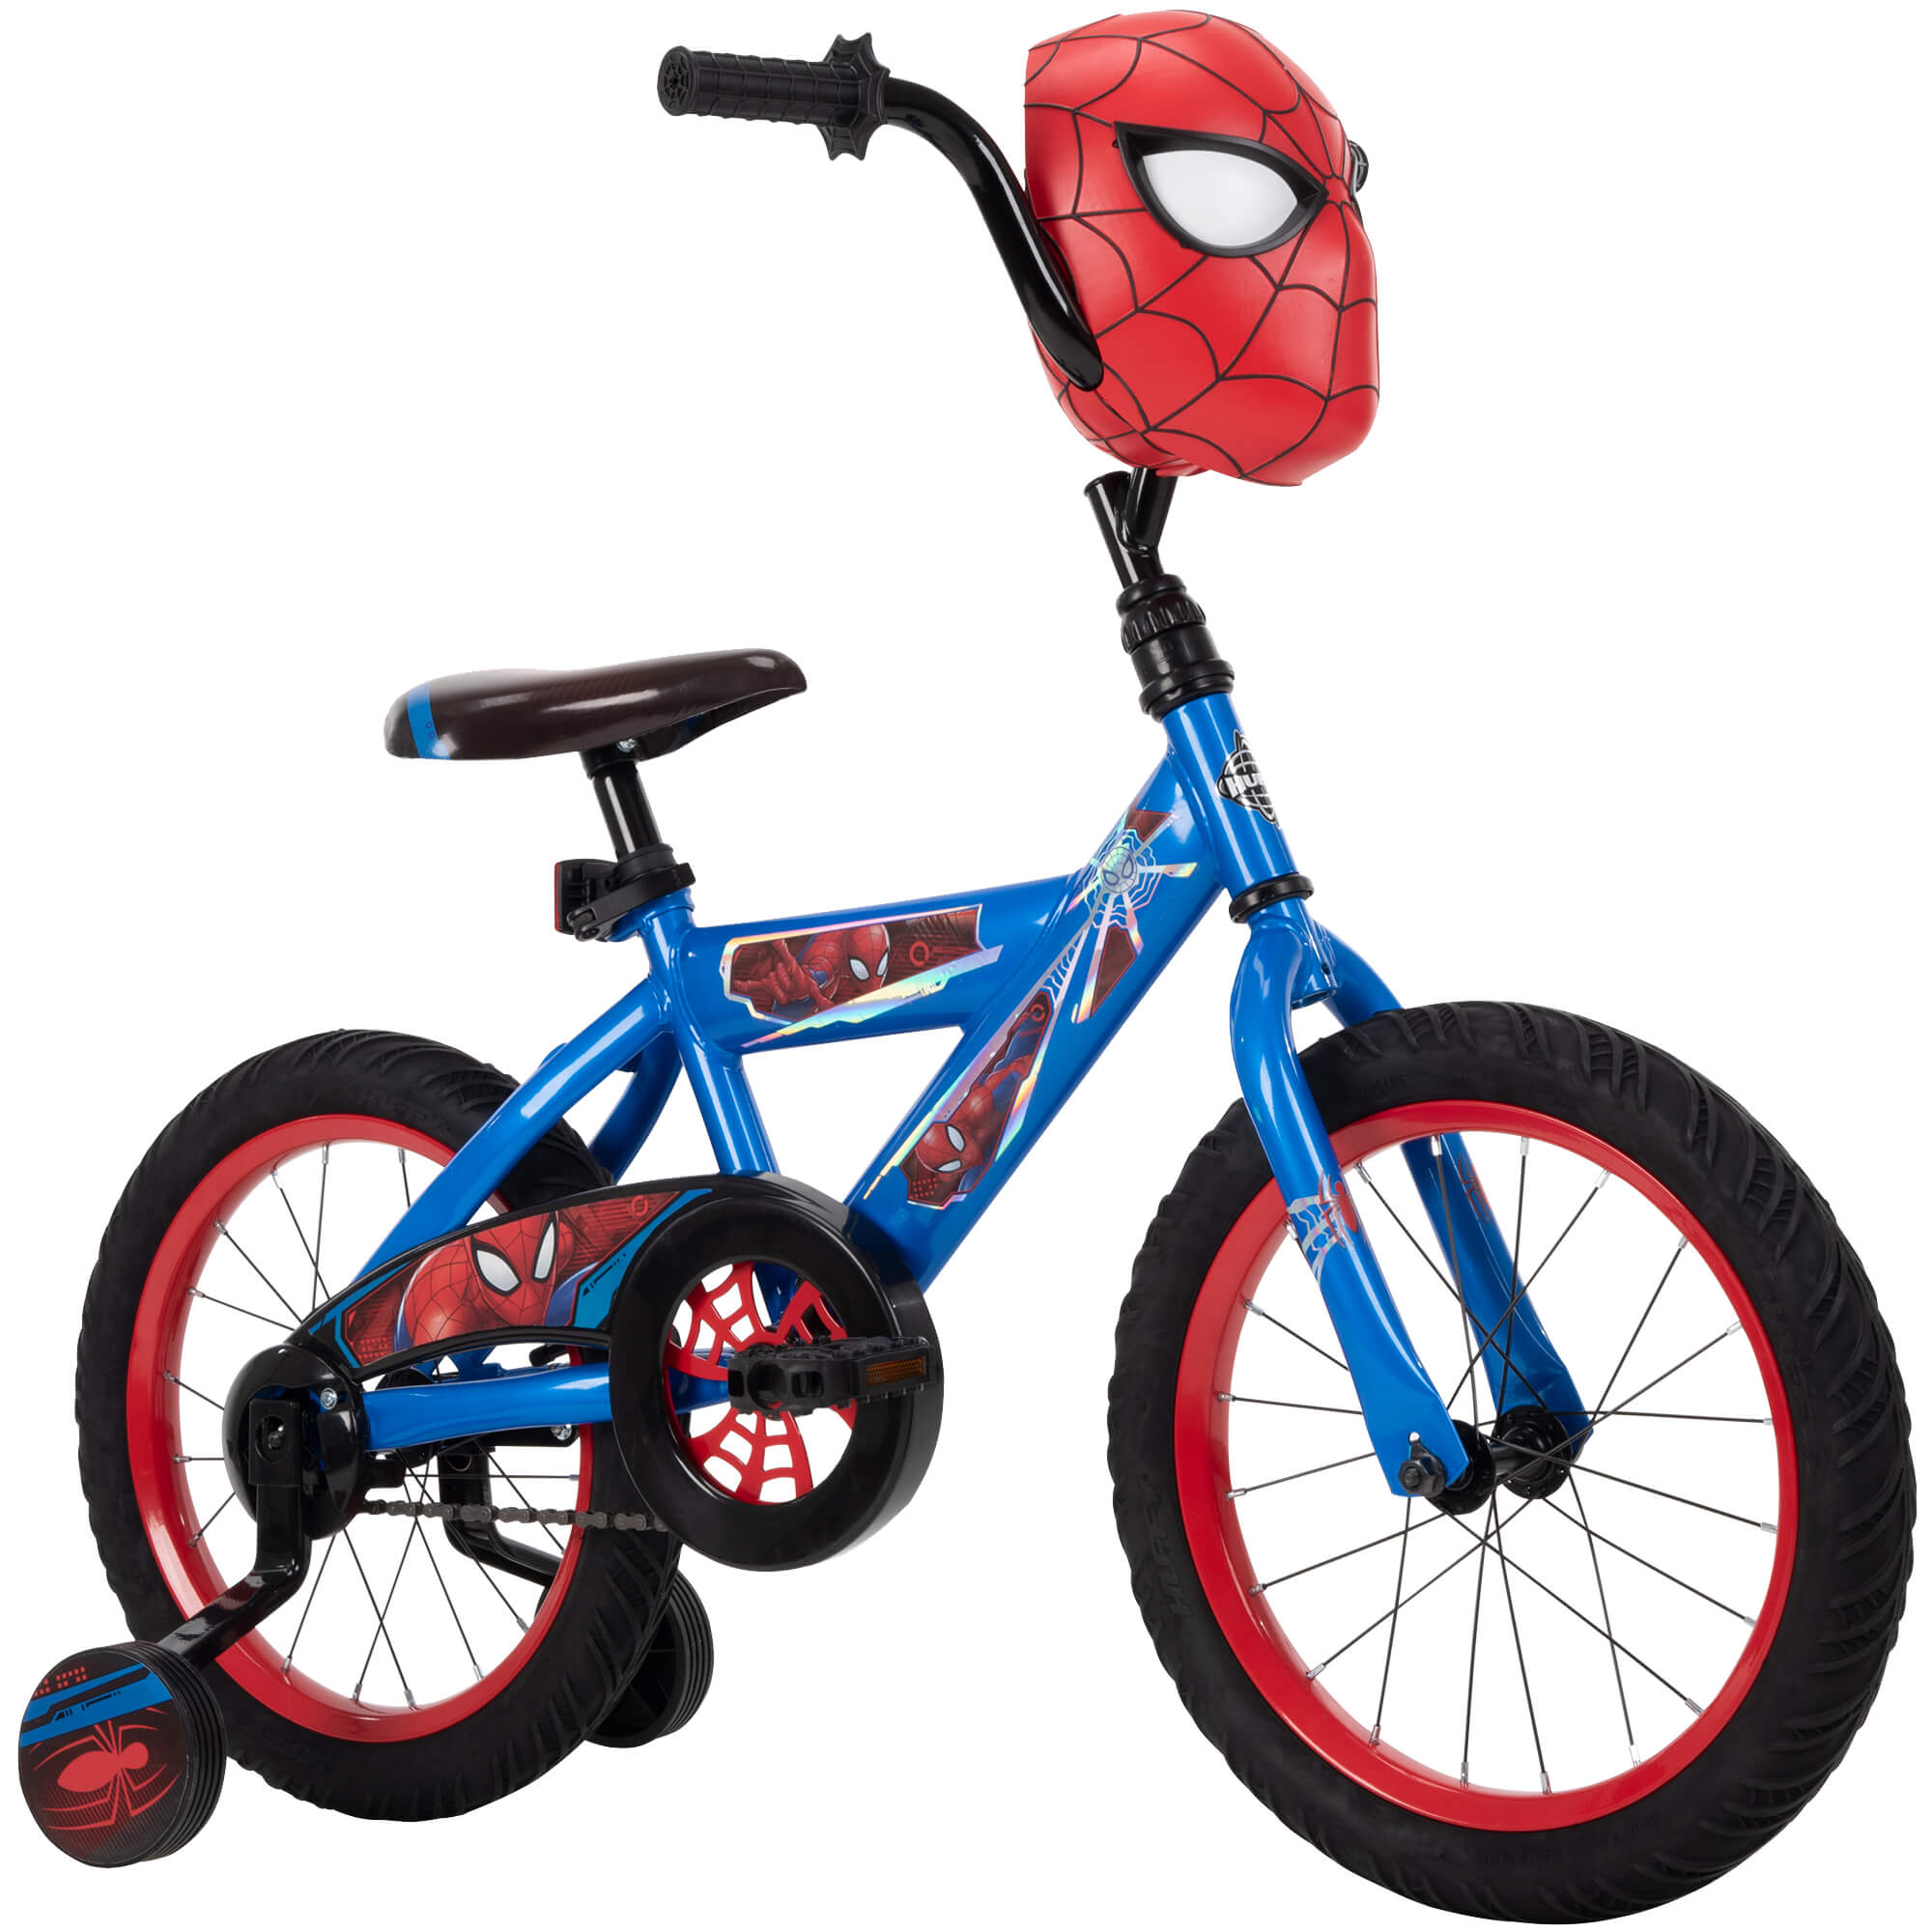 16" Marvel Spider-Man Bike for Boys' by Huffy - image 3 of 11